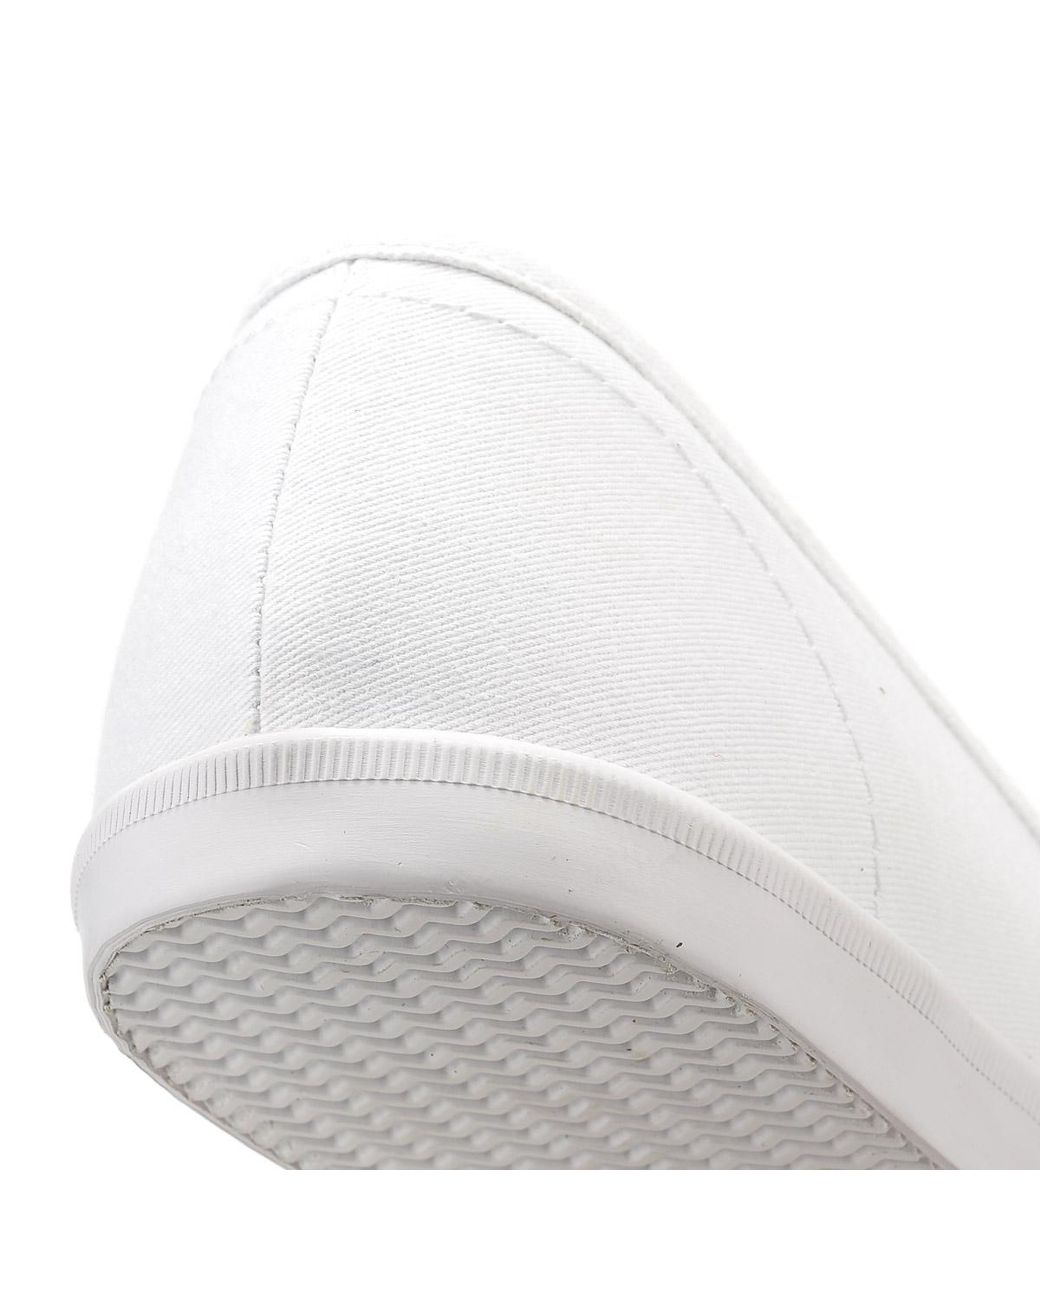 Fred Perry Womens White Aubrey Twill Trainers | Lyst UK